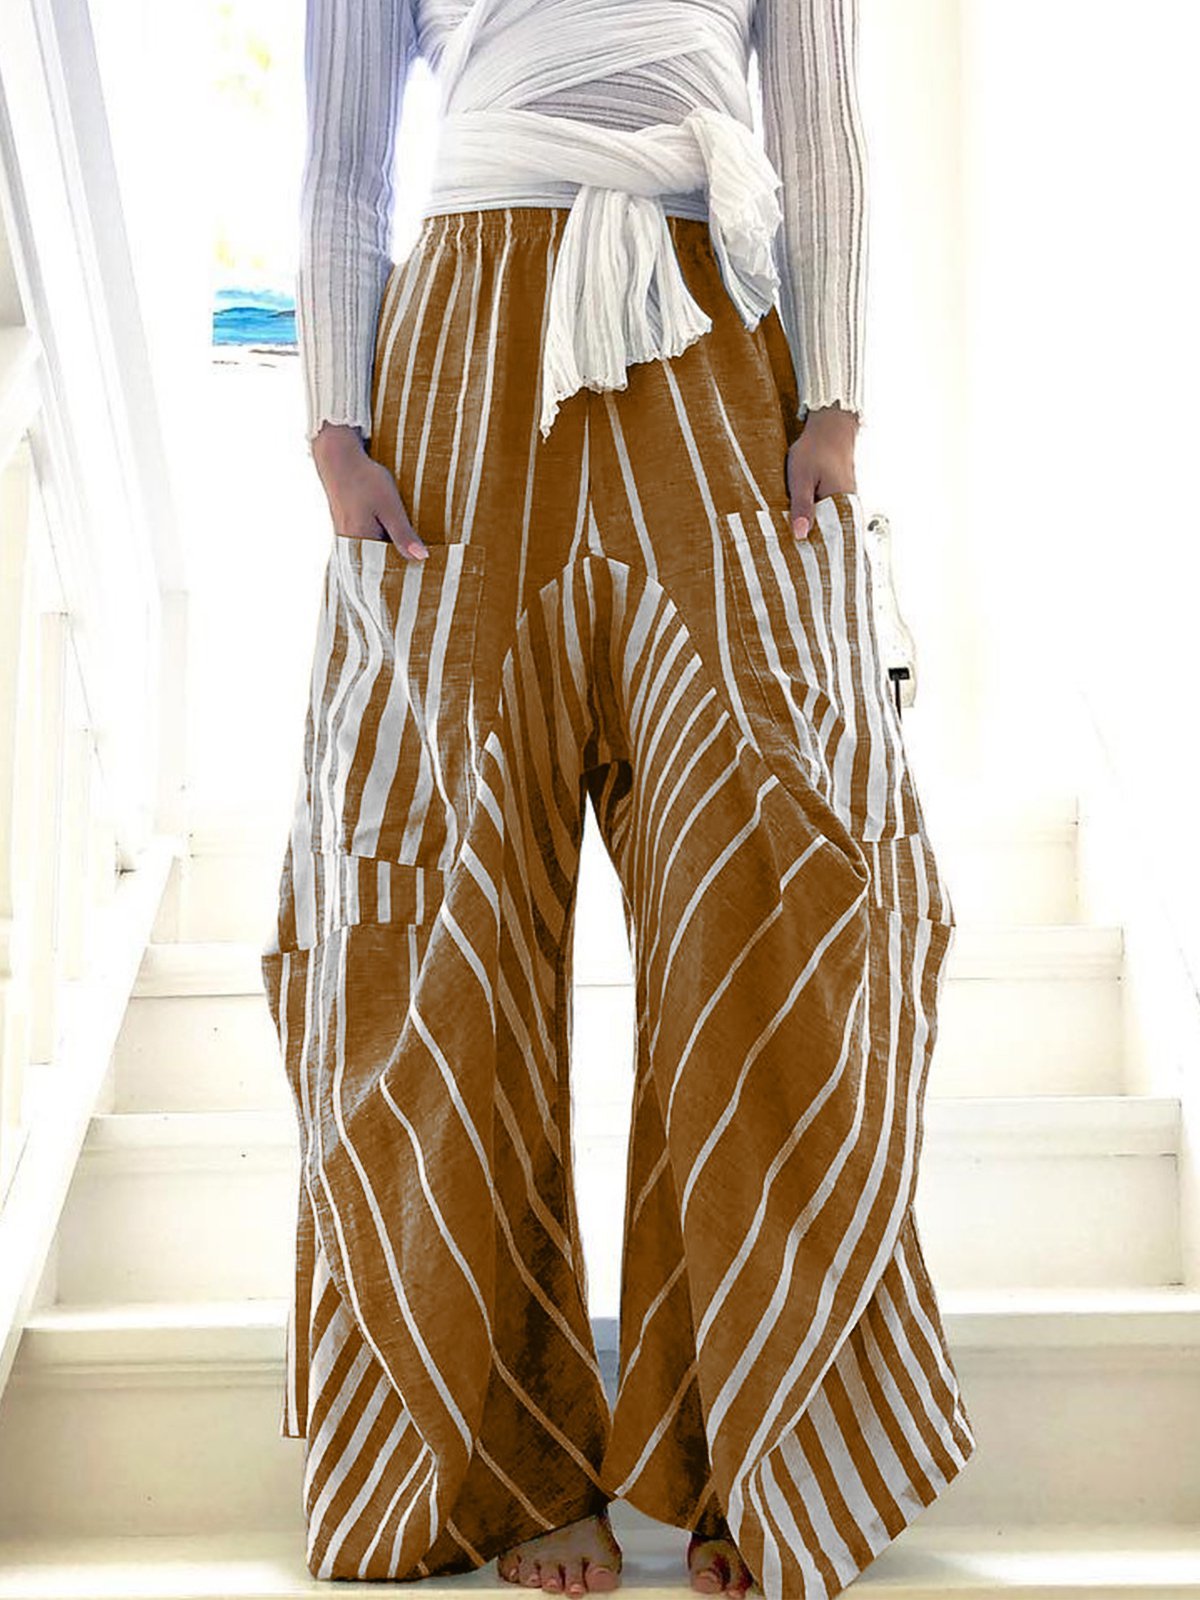 Striped Vacation Trousers